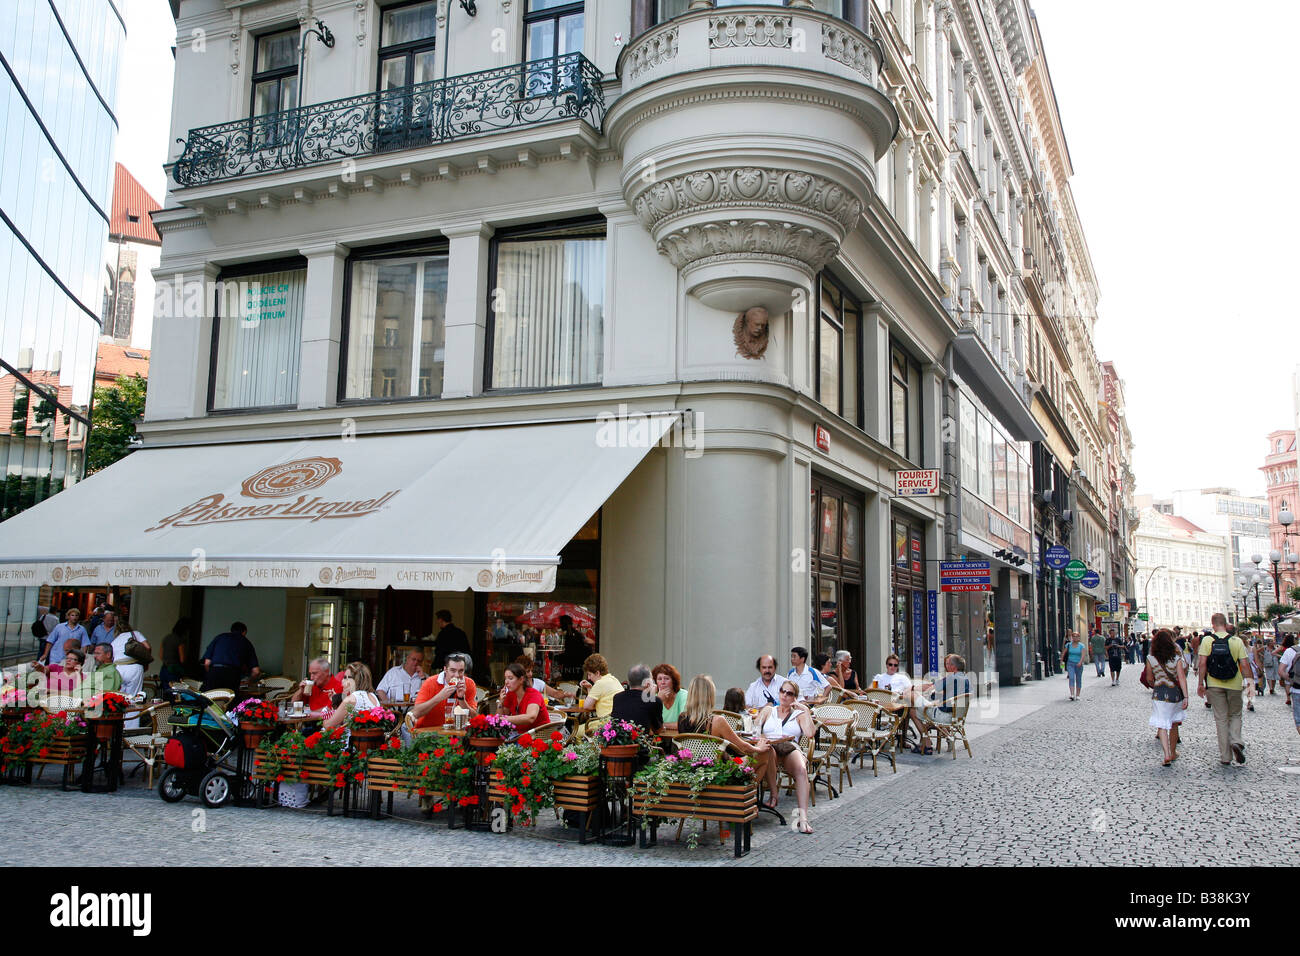 Aug 2008 - People sitting at an outdoors cafe in the New Town on 28 Rijna street Nove Mesto Prague Czech Republic Stock Photo